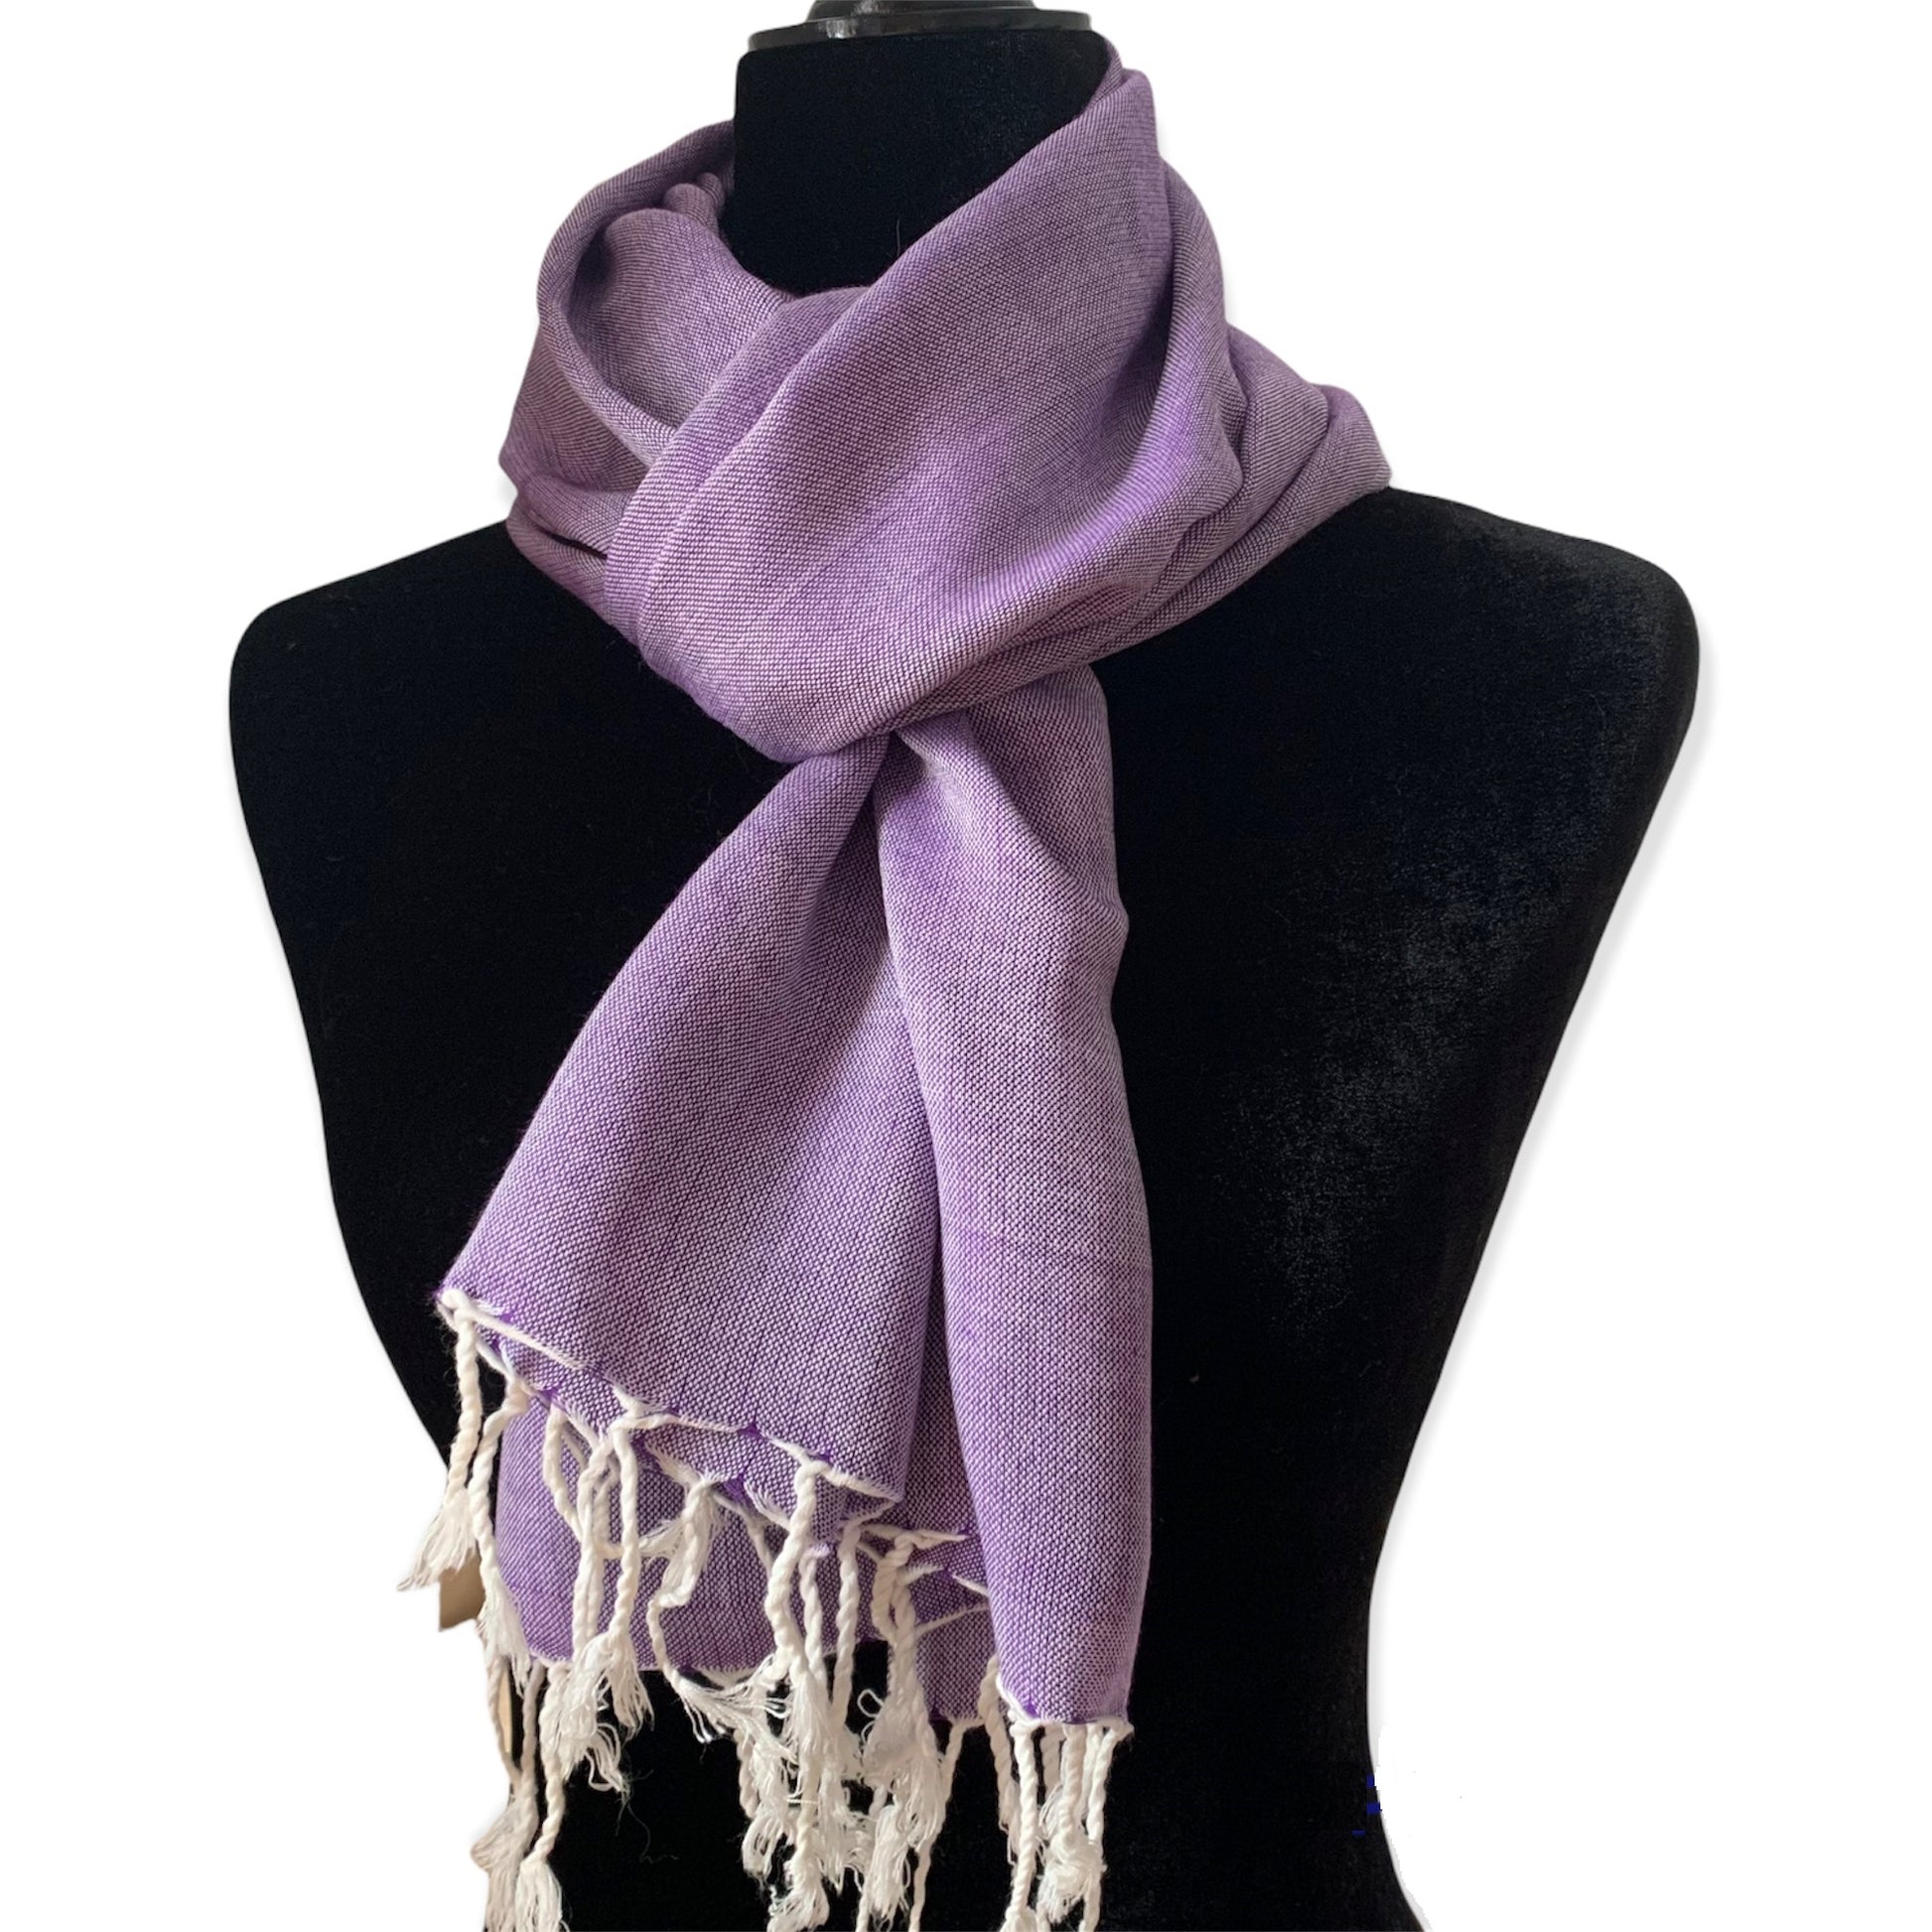 Small Solid Handwoven Scarf - Mauve & White